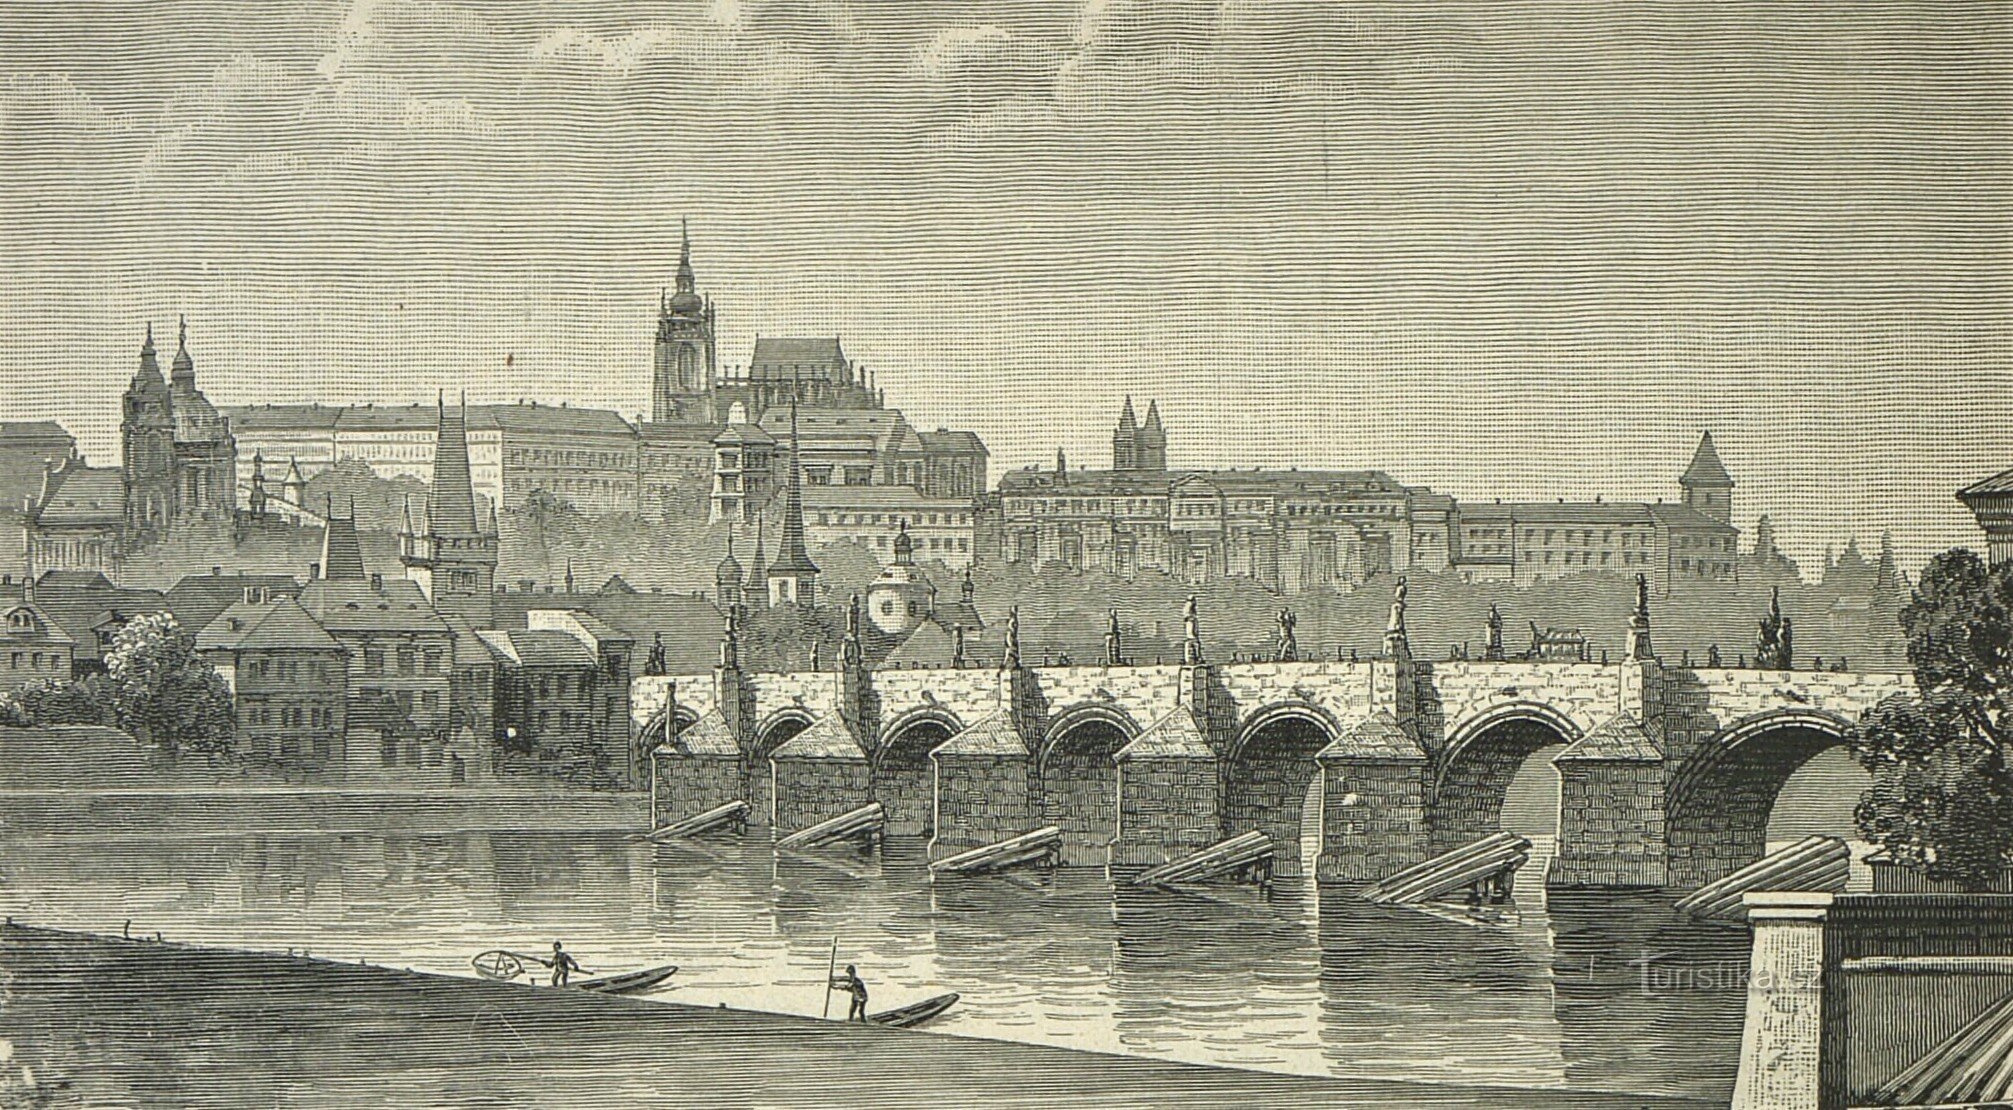 Engraving of the Charles Bridge in Prague from the turn of the 19th and 20th centuries